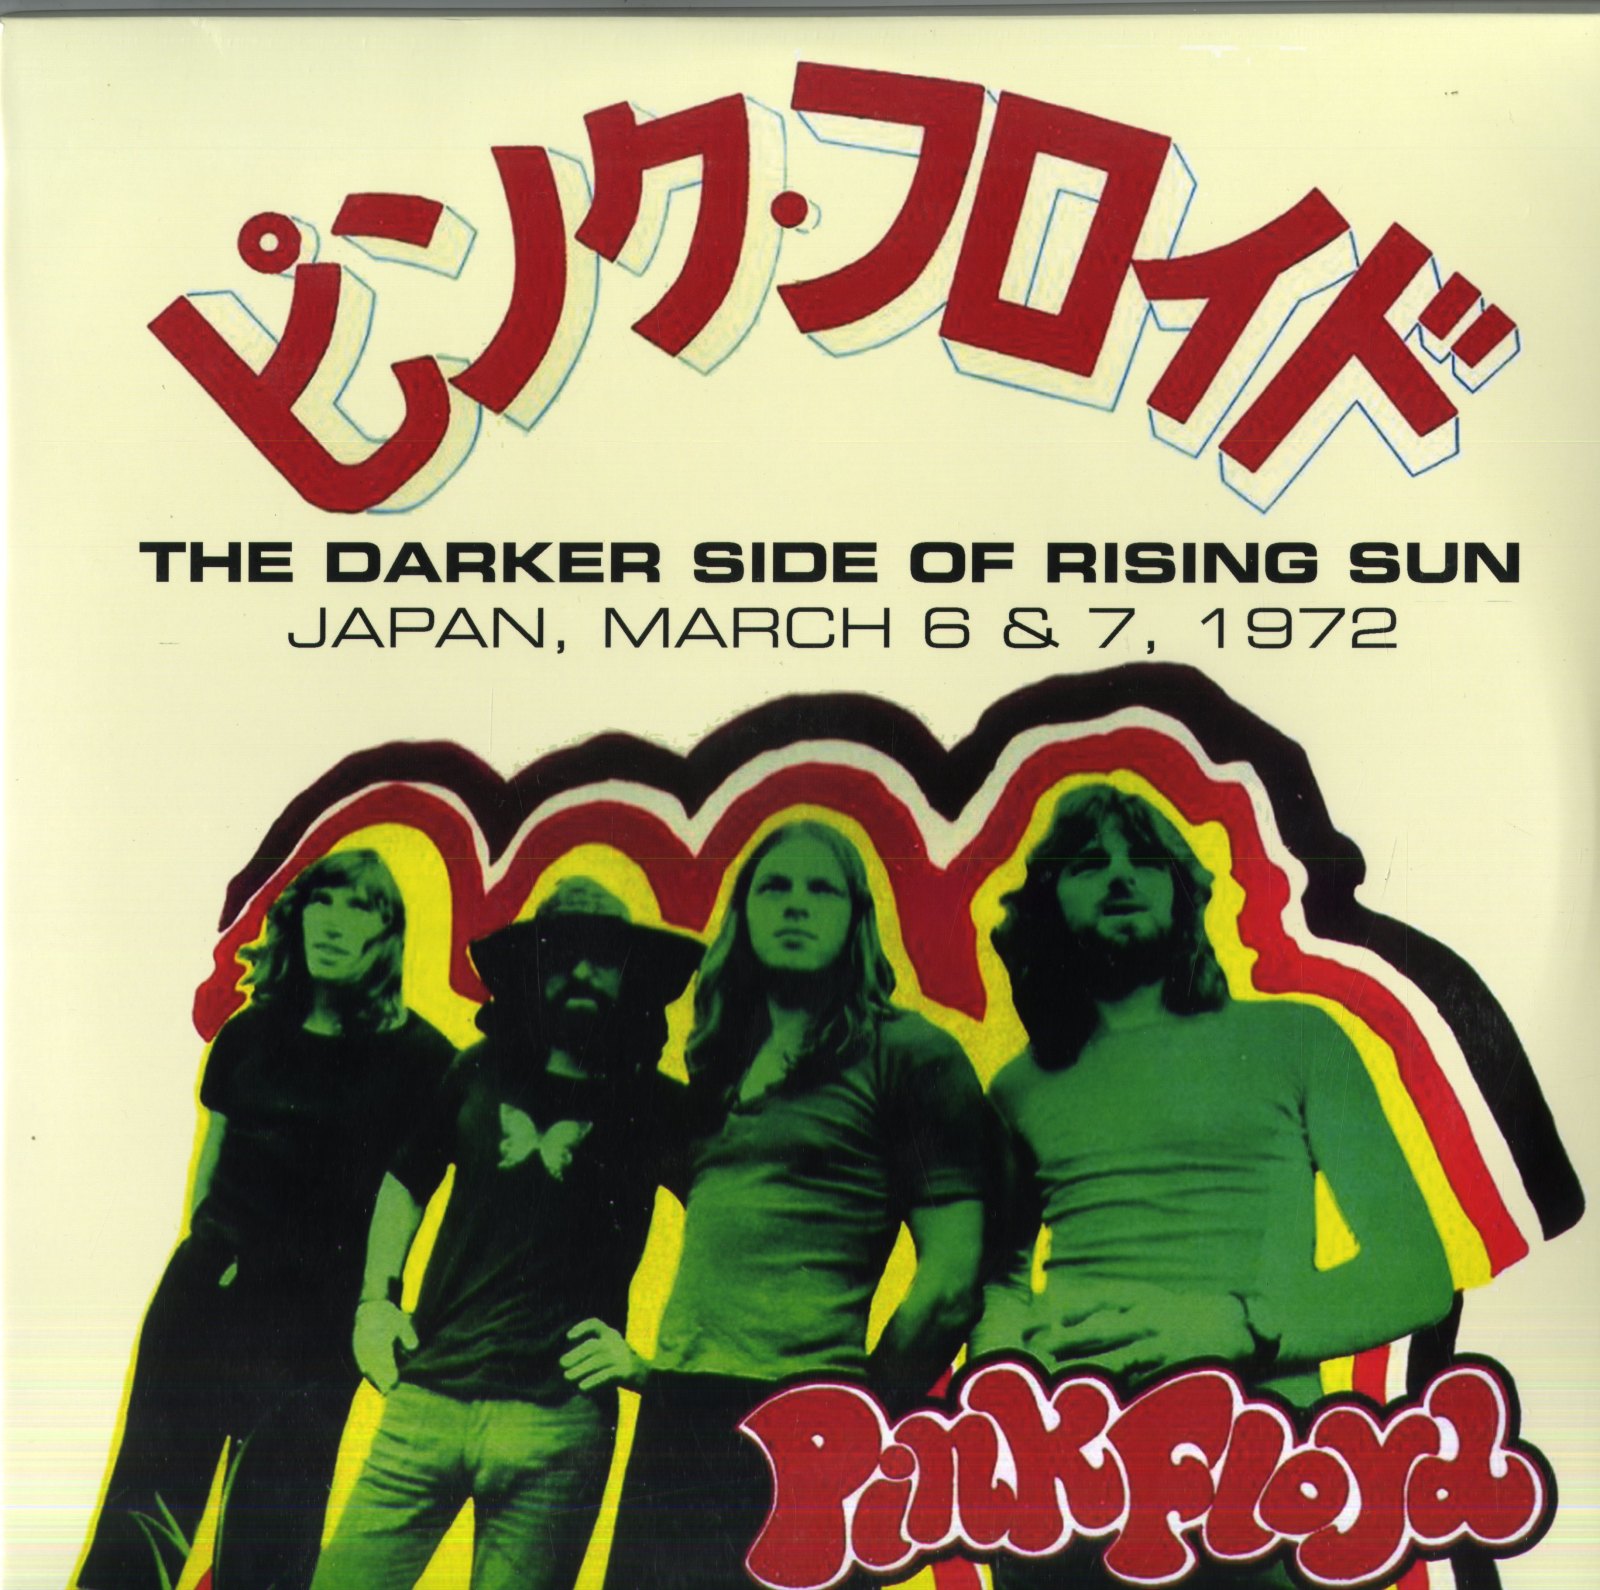 PINK FLOYD - Darker Side Of Rising Sun: Japan, March 6 & 7, 1972 - Hand Numbered